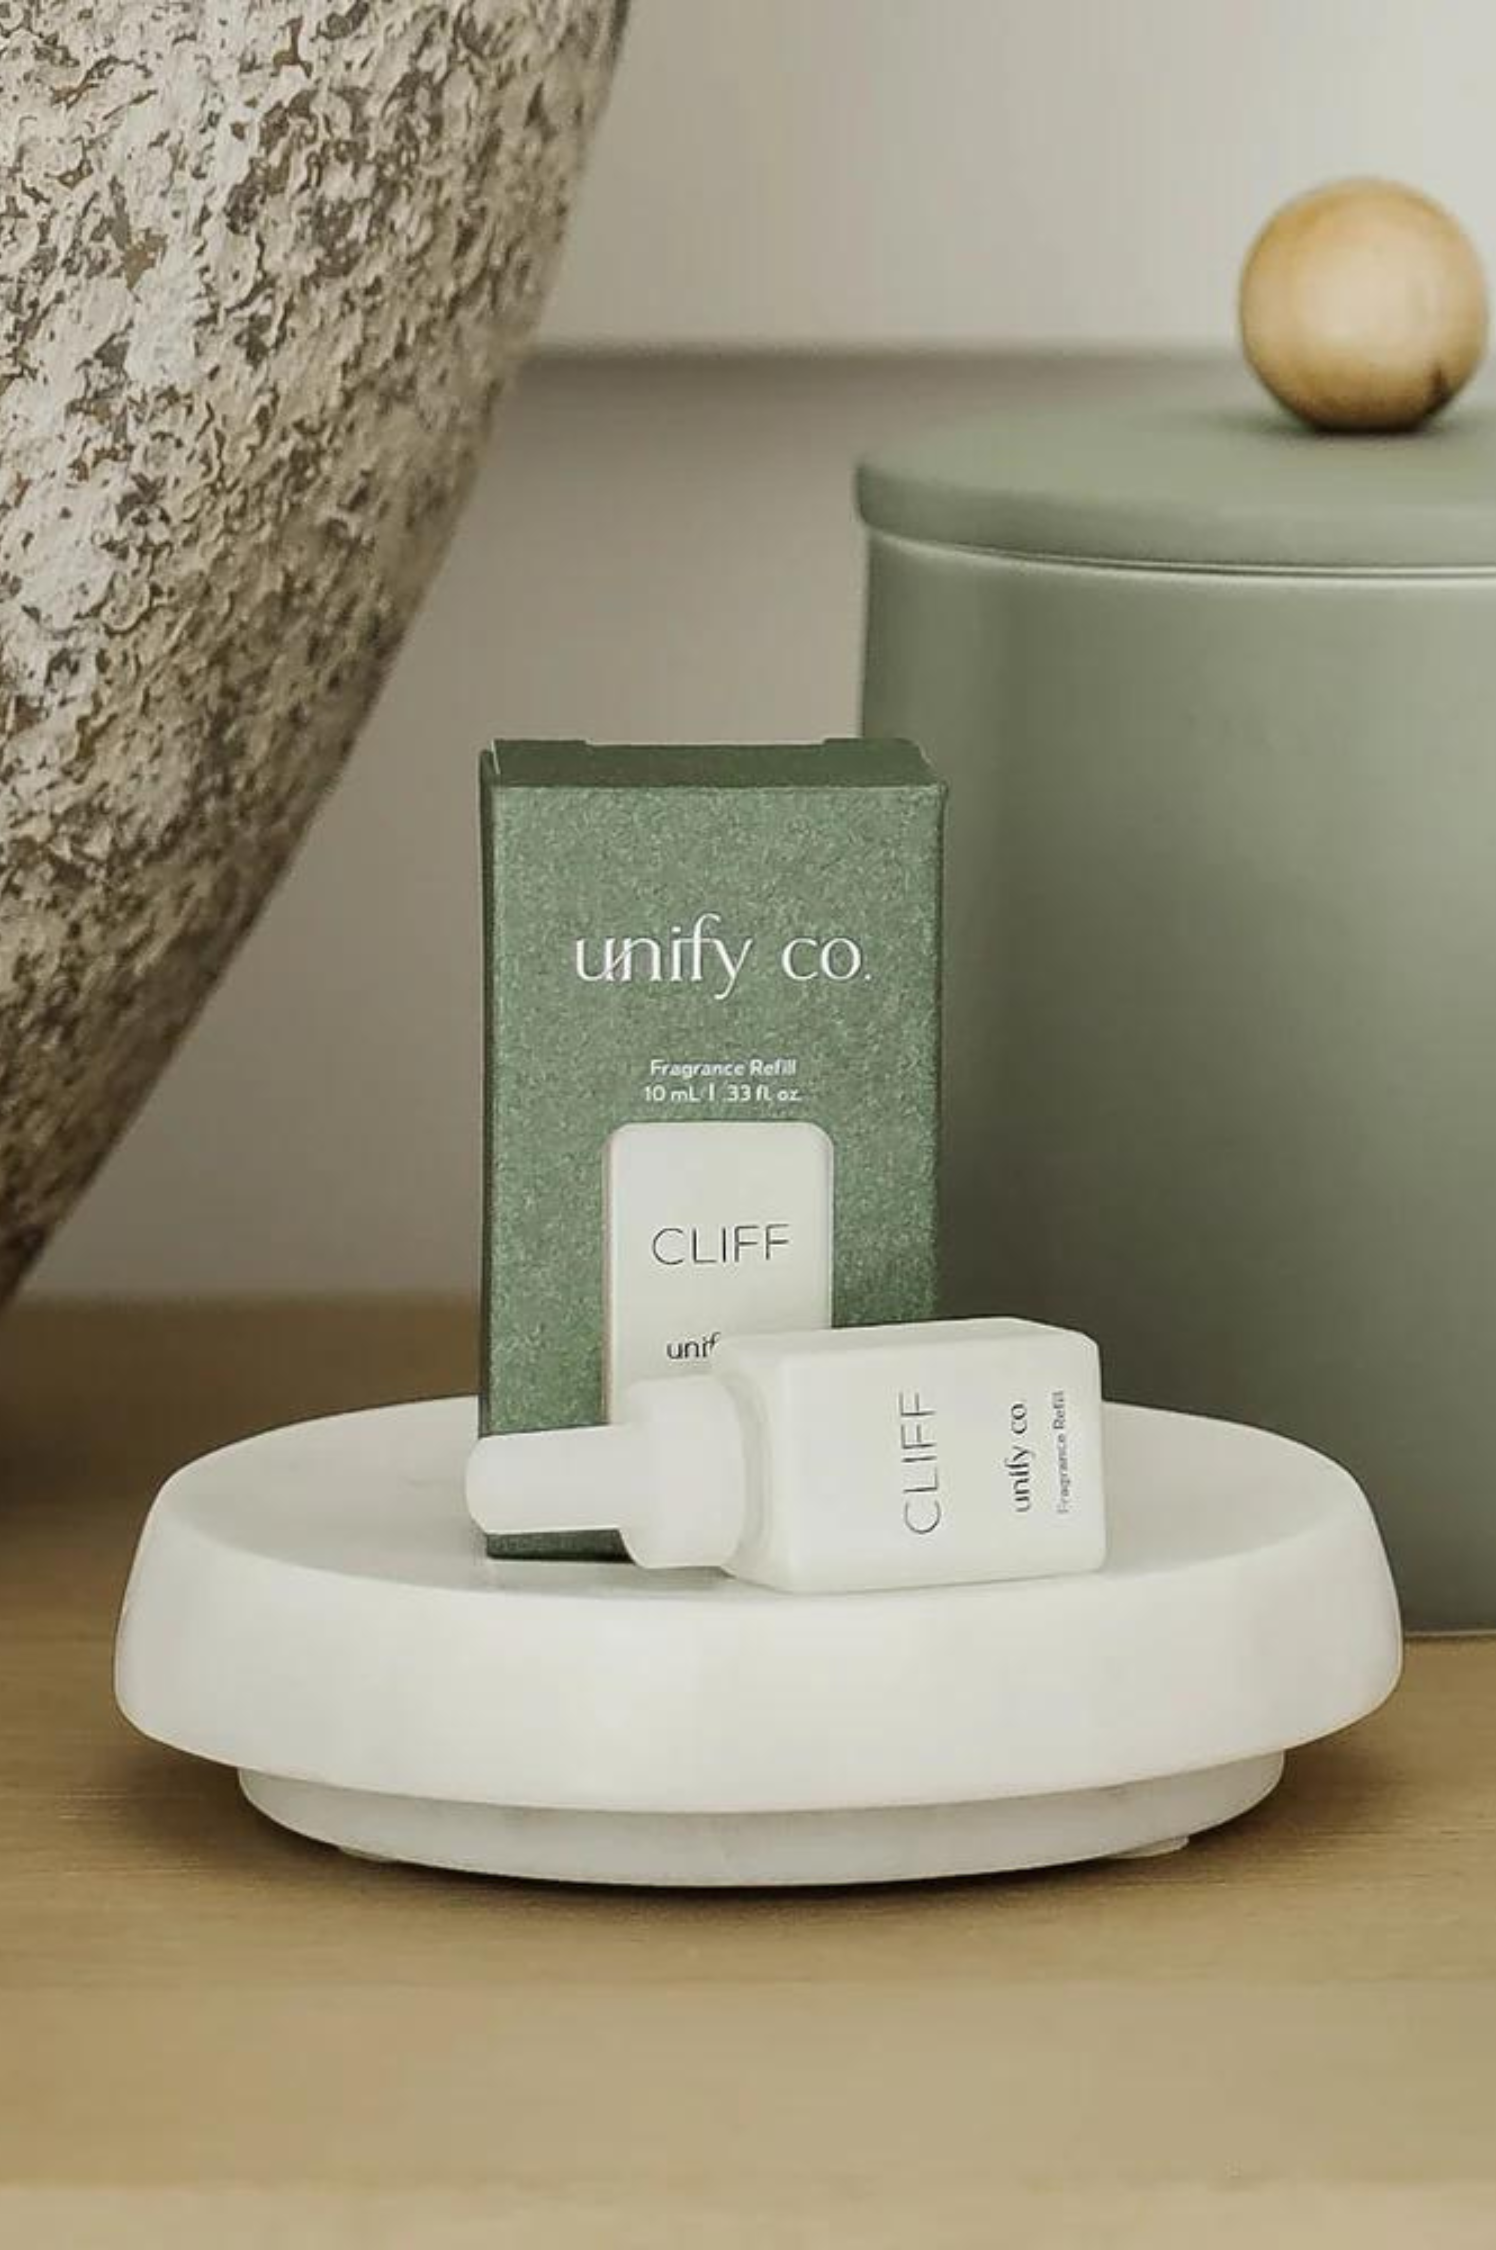 Unify Co - Cliff